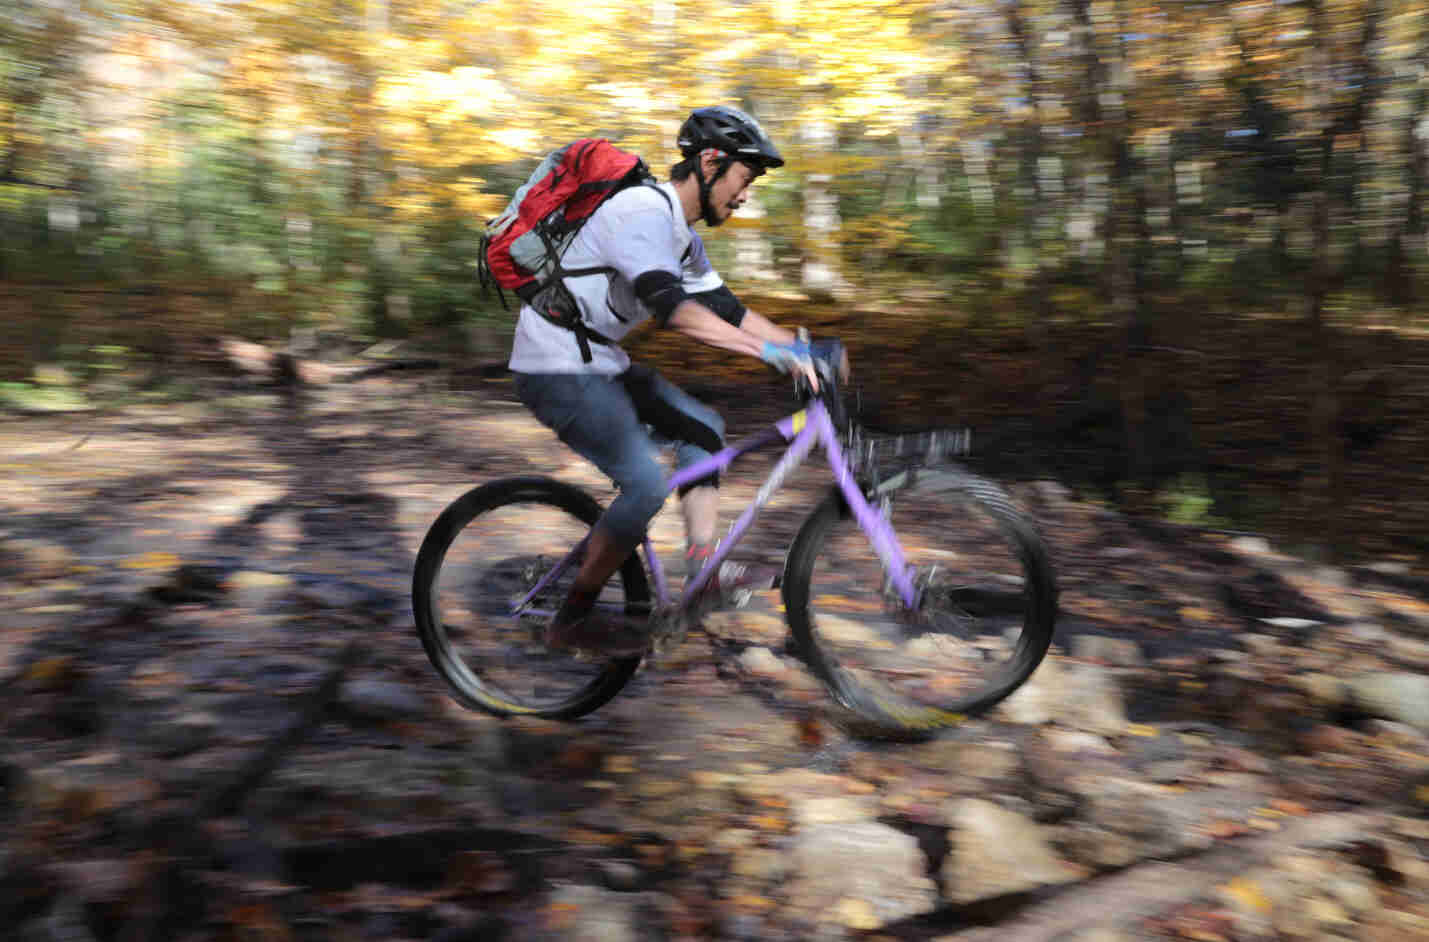 Blurry right side view of a cyclist with a backpack, riding a purple Surly bike